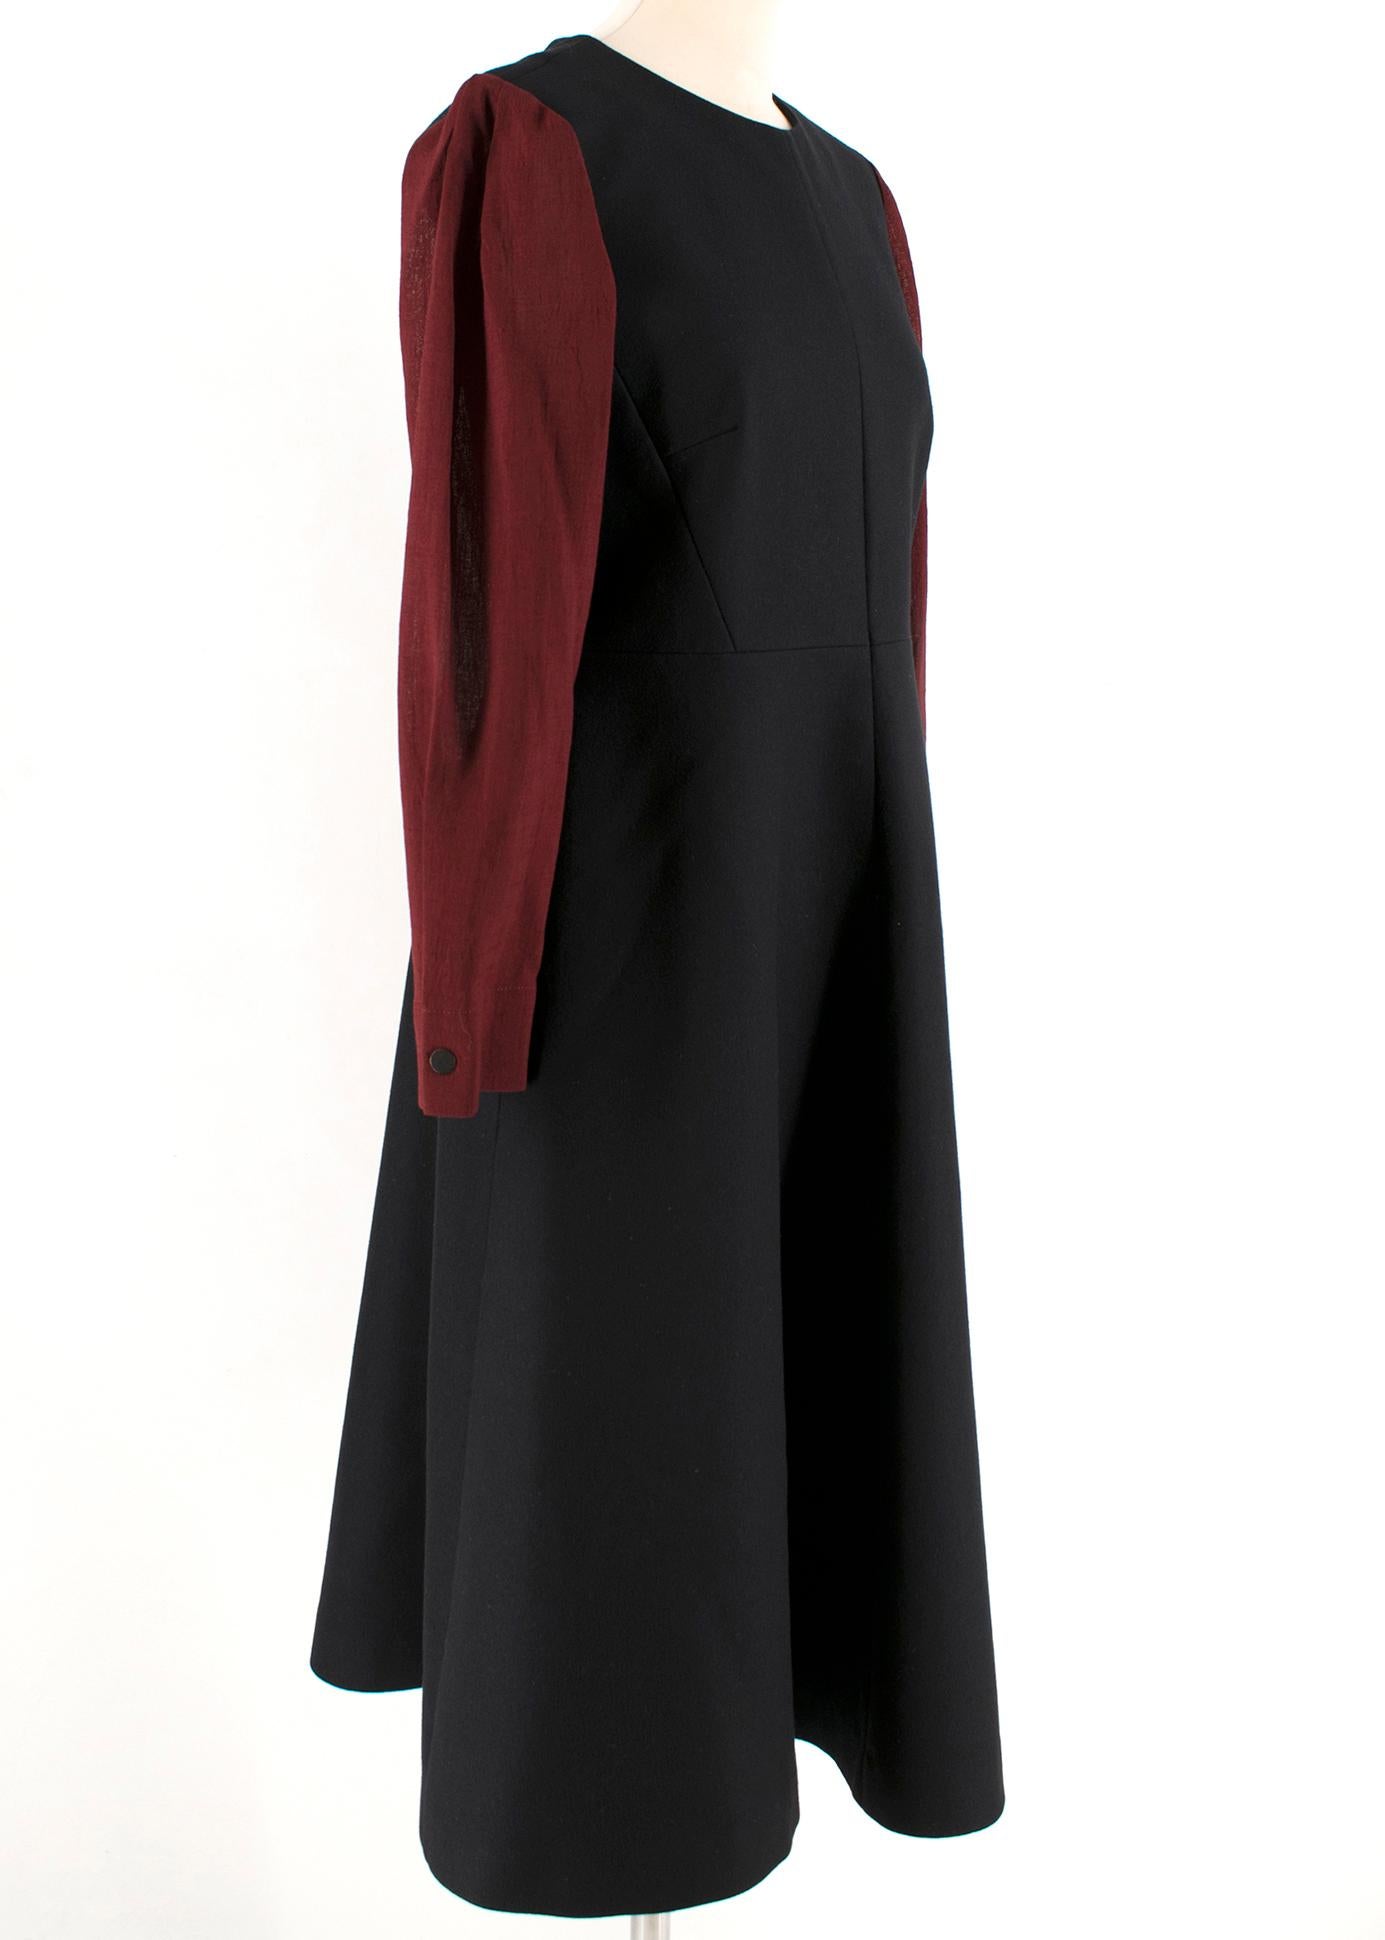 Cefinn Black & Red Midi Dress

Black dress with long sleeves in red,
Fitted waist, fitted to the shoulders,
Side pockets,
Rear zip fastening,
Button cuff,
A-line skirt design

Please note, these items are pre-owned and may show some signs of